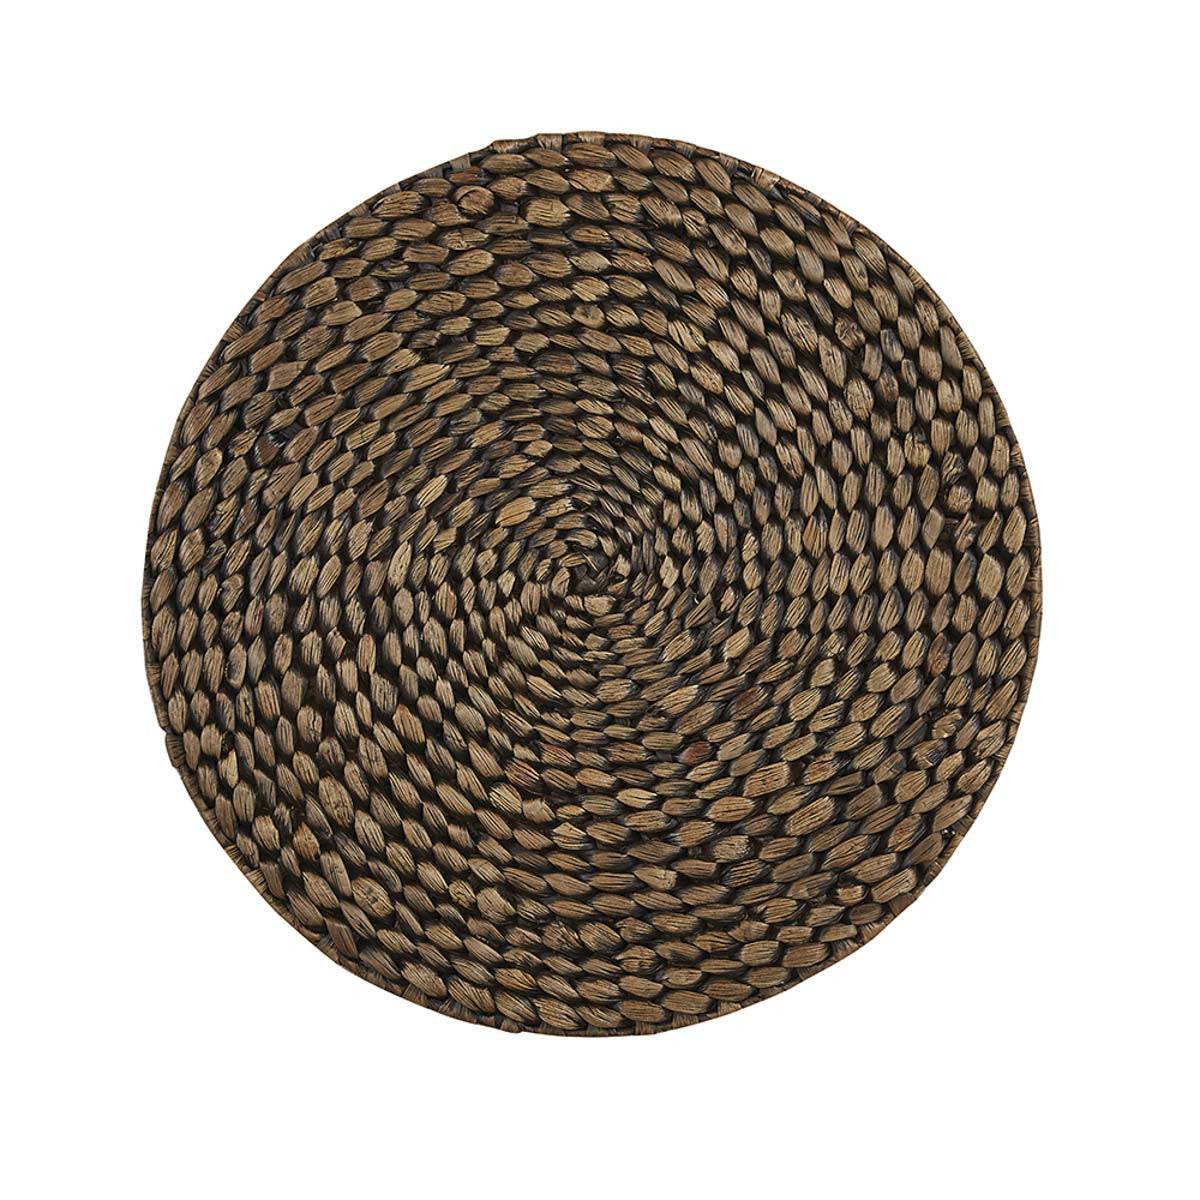 round placemat made from braided hyacinth with a light brown-washed finish.